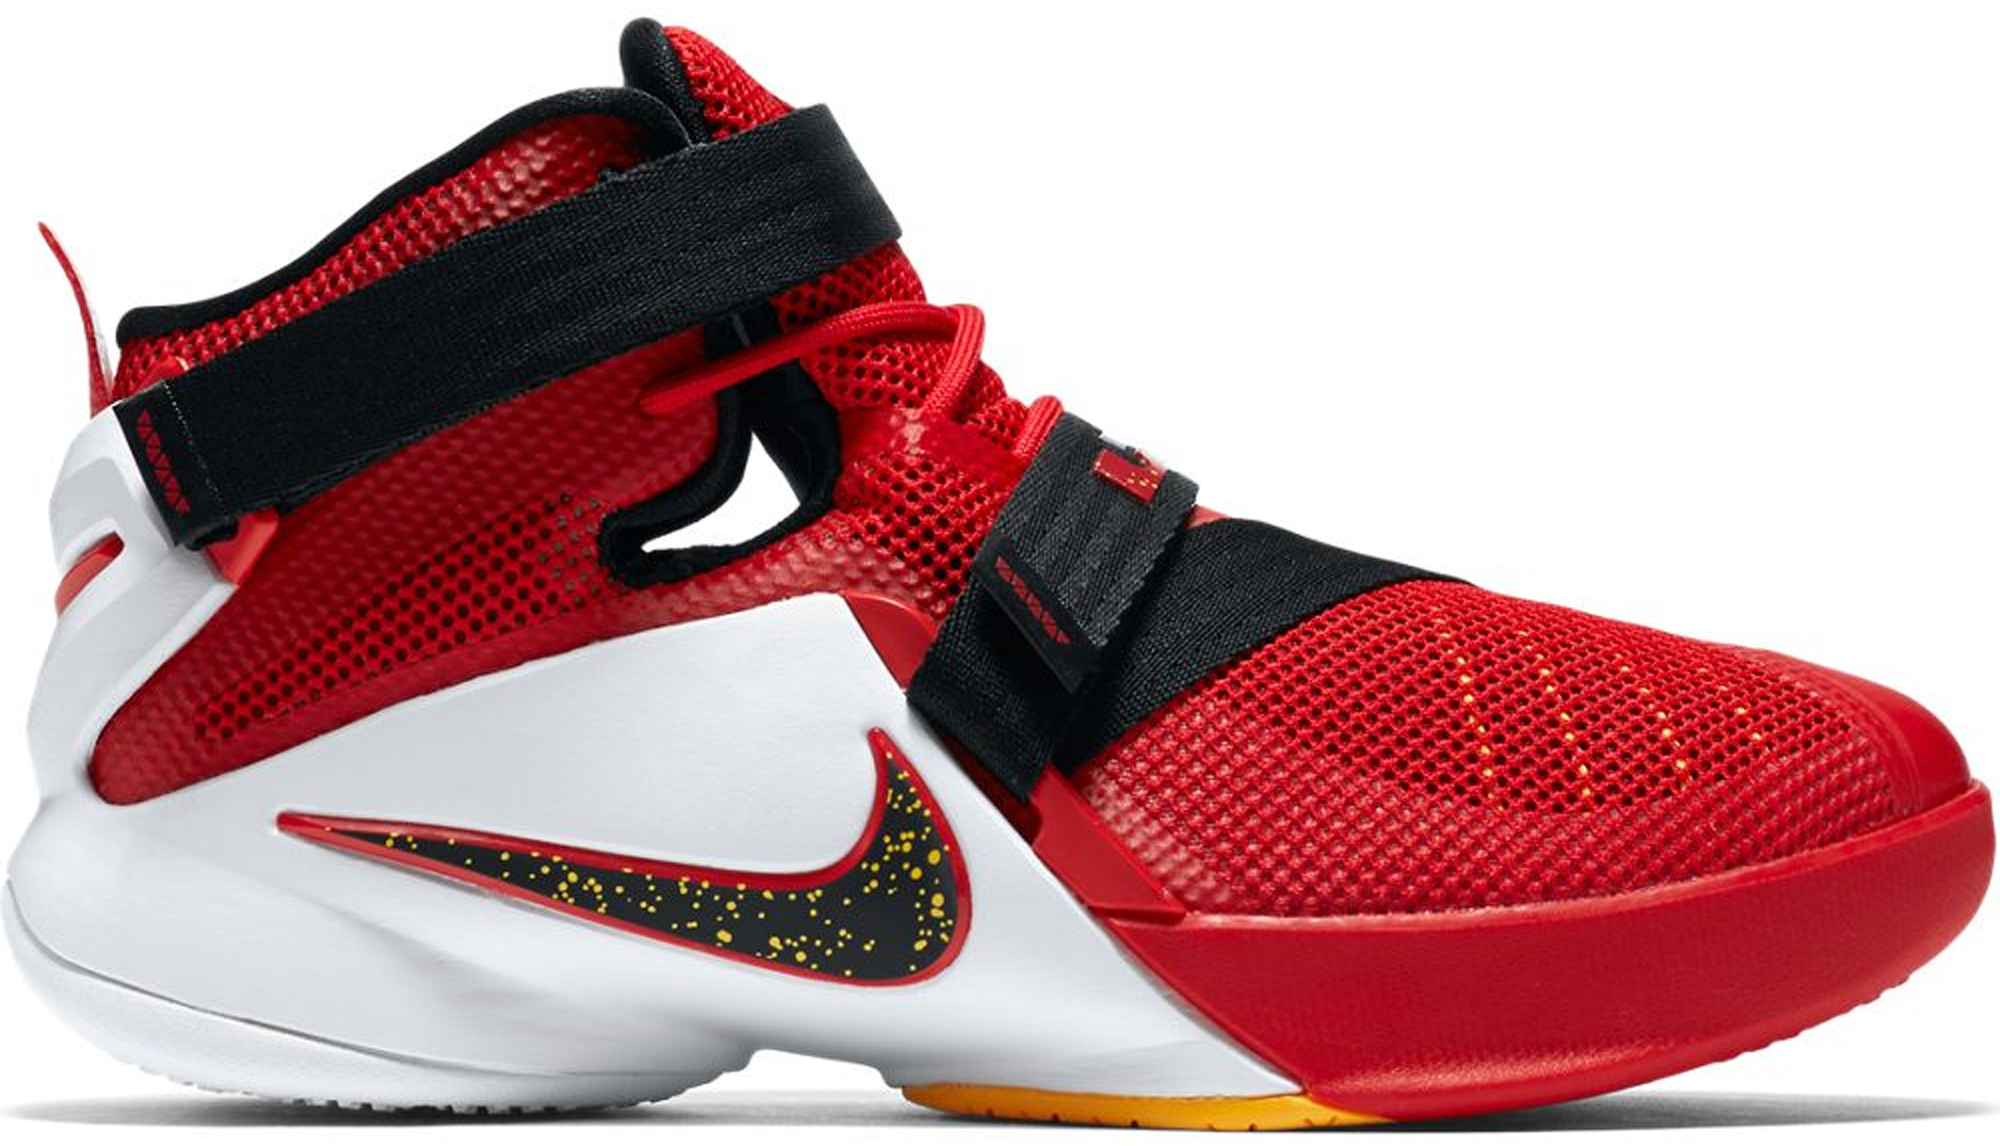 Nike LeBron Zoom Soldier 9 Red Champ 